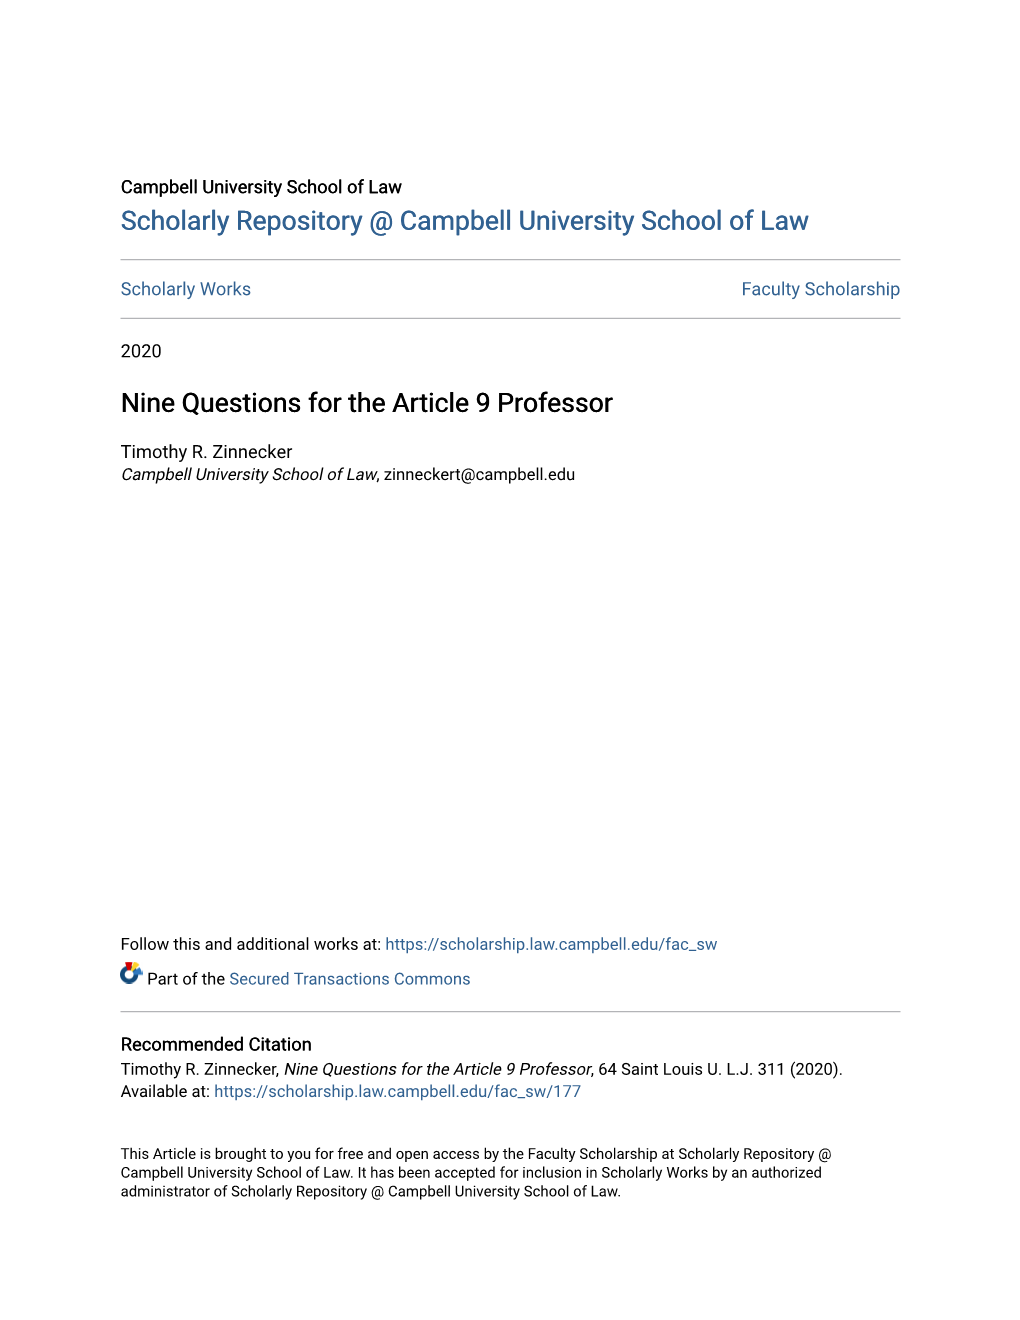 Nine Questions for the Article 9 Professor